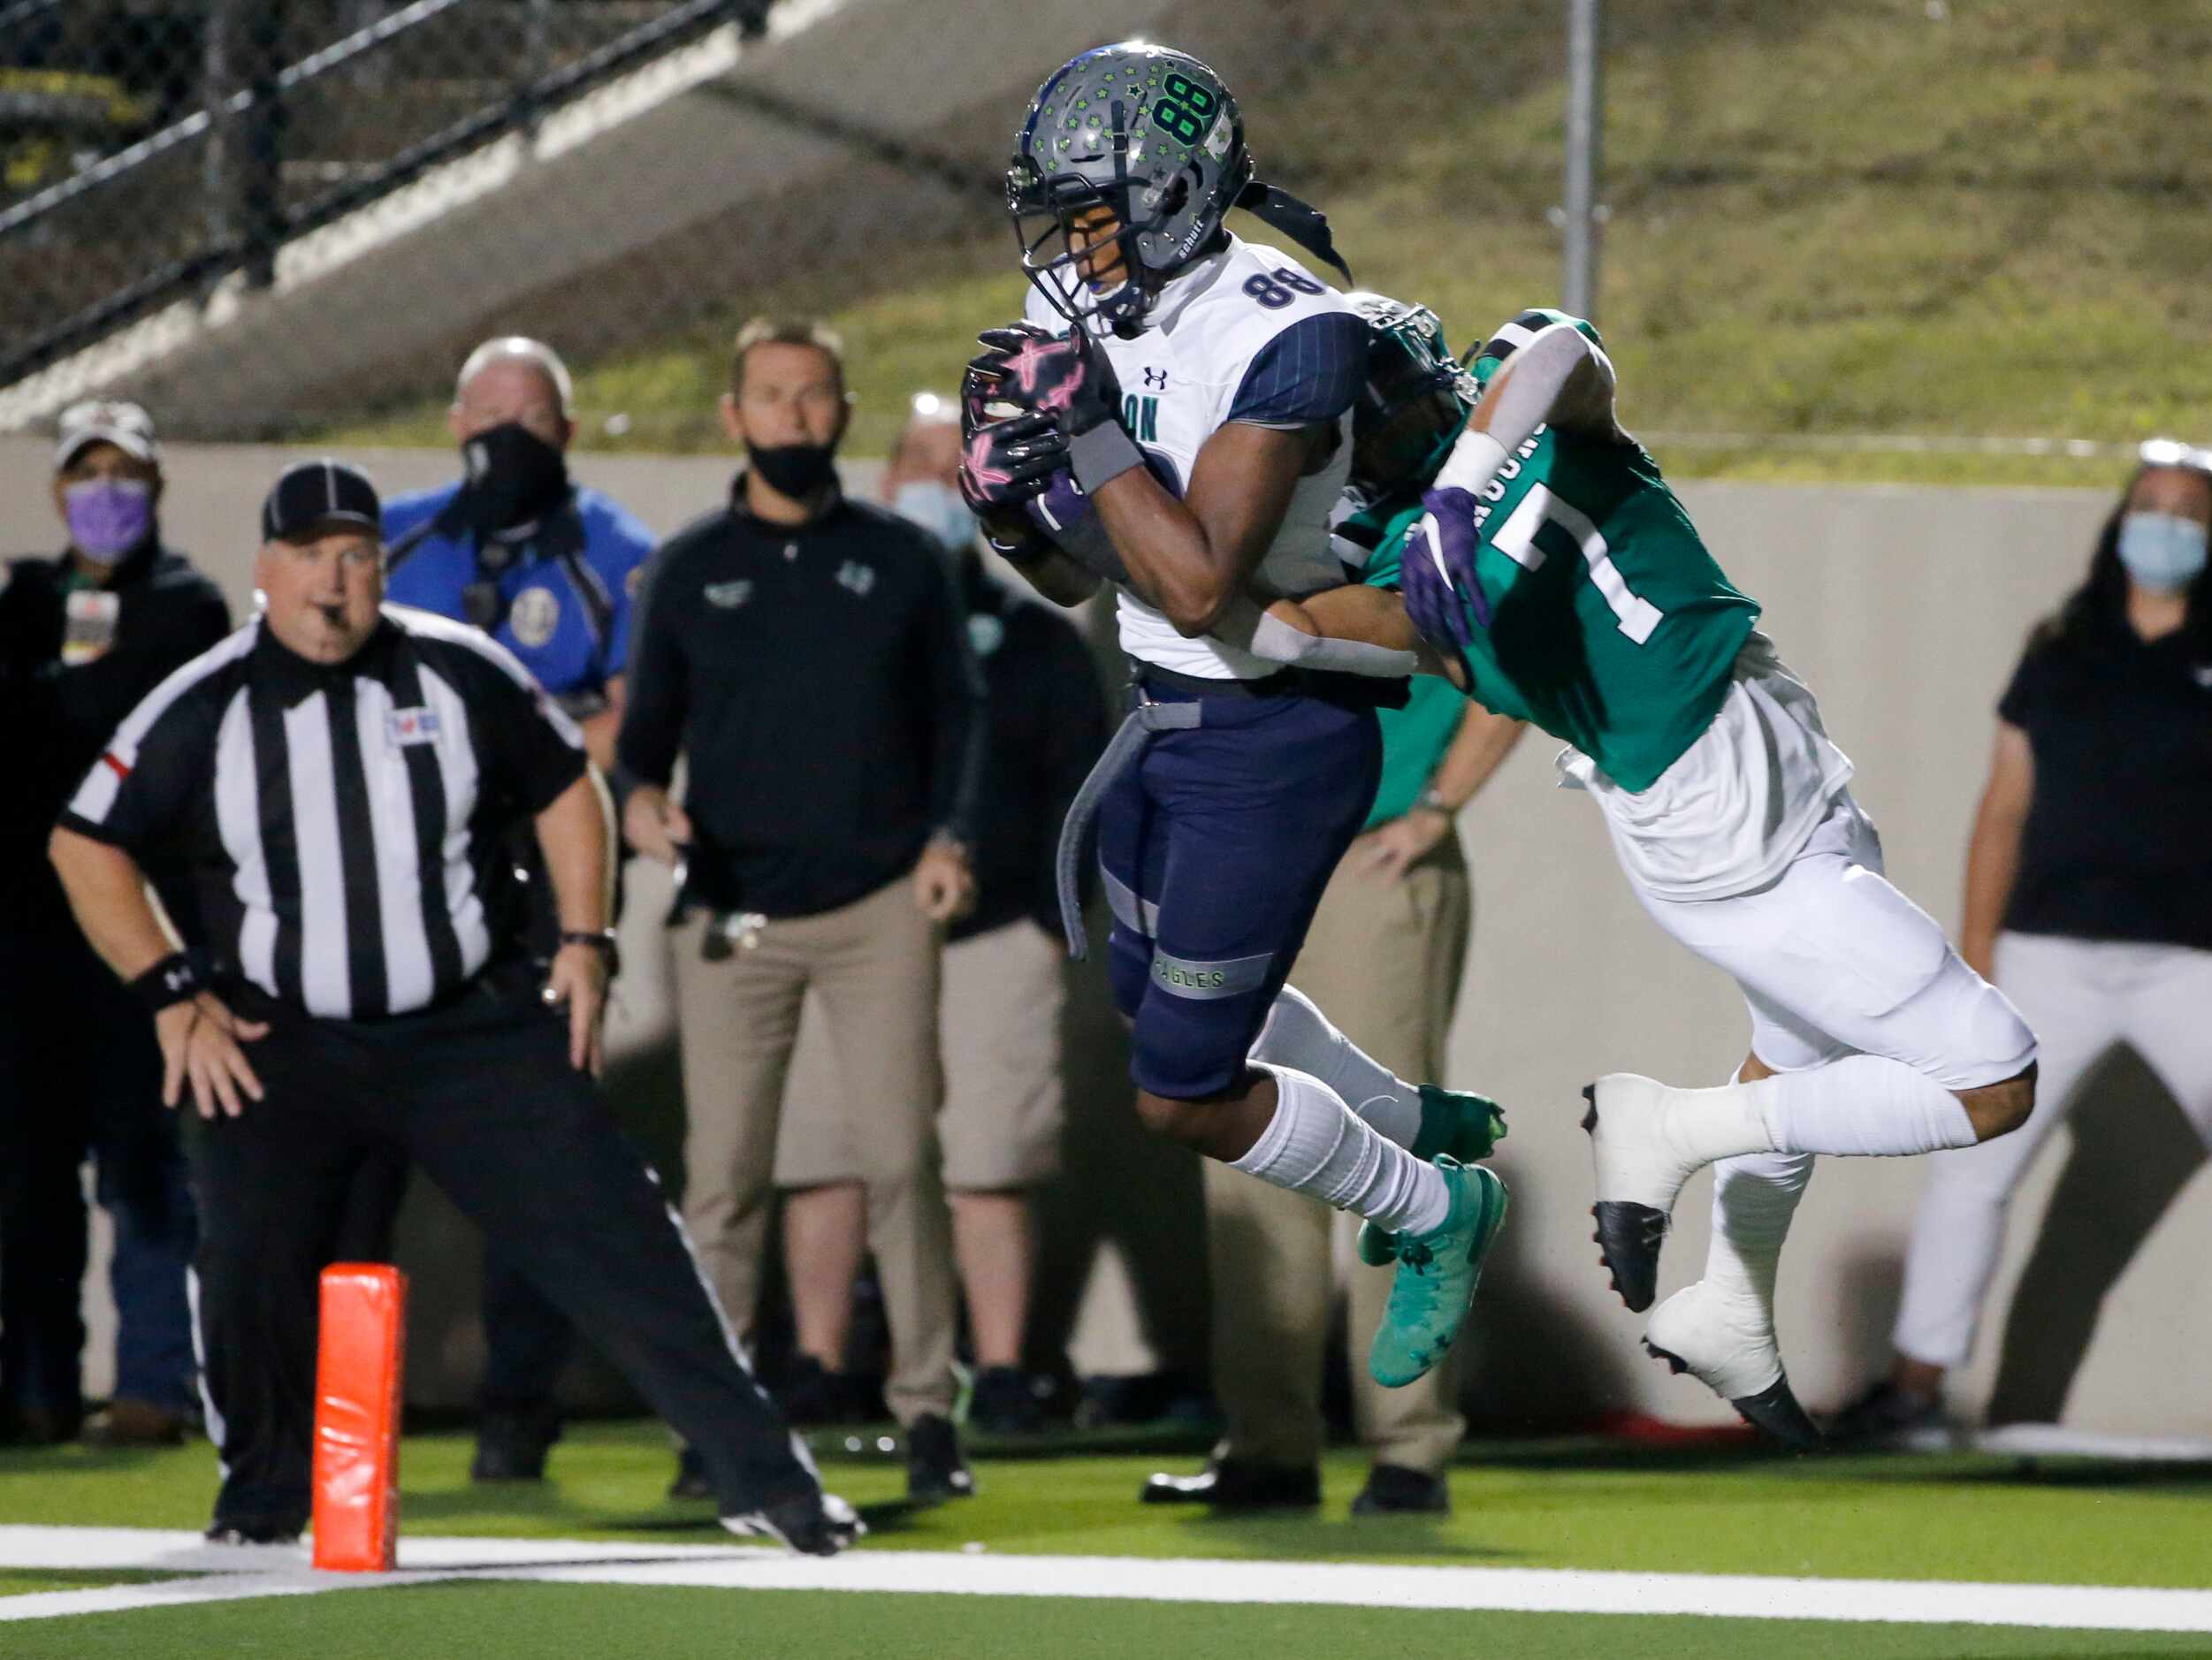 Eaton’s Chandler Whitebear (88) catches a touchdown pass in front of Southlake defender...